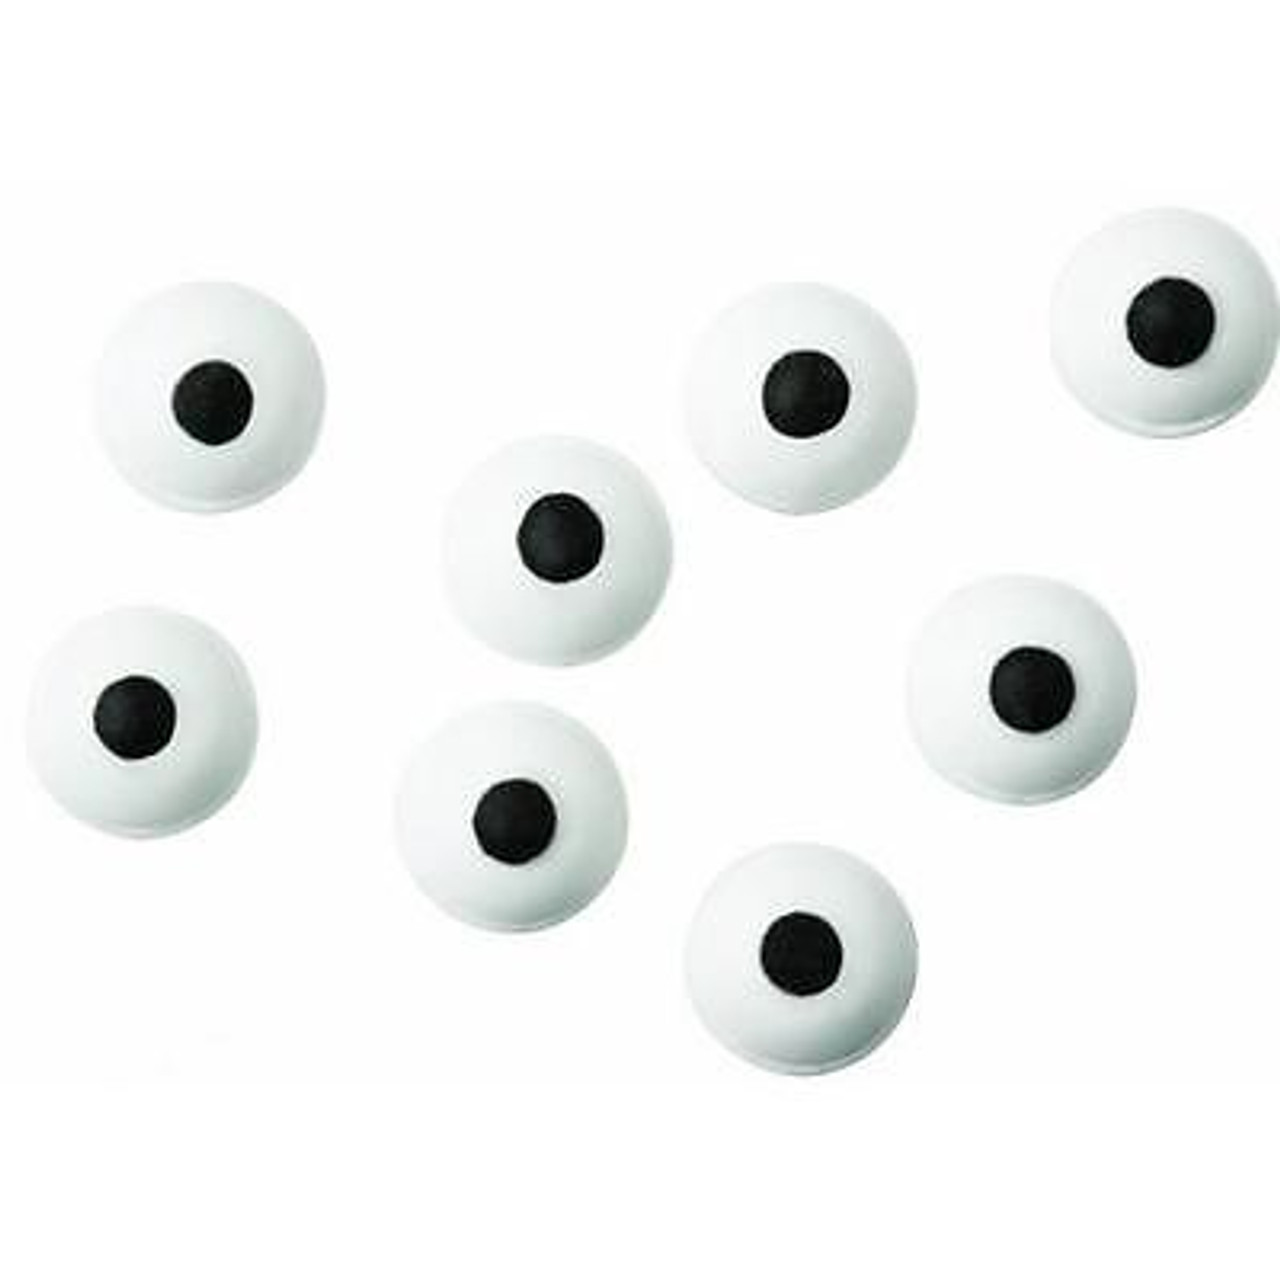 Candy Eyes 40pc - Party Time, Inc.